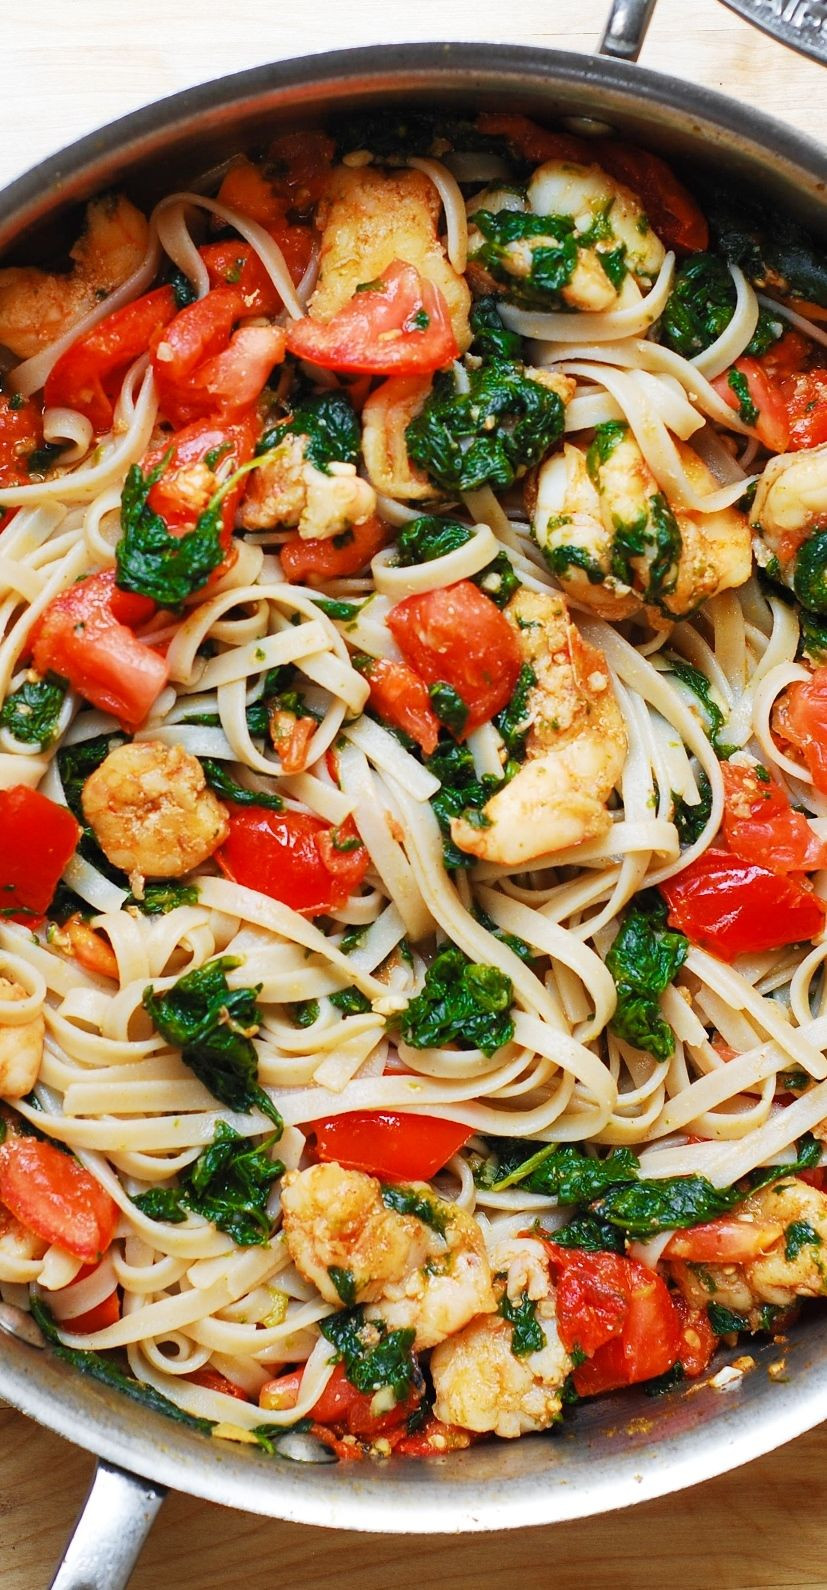 Italian Shrimp Pasta Recipes
 Shrimp pasta with fresh tomatoes and spinach in a garlic